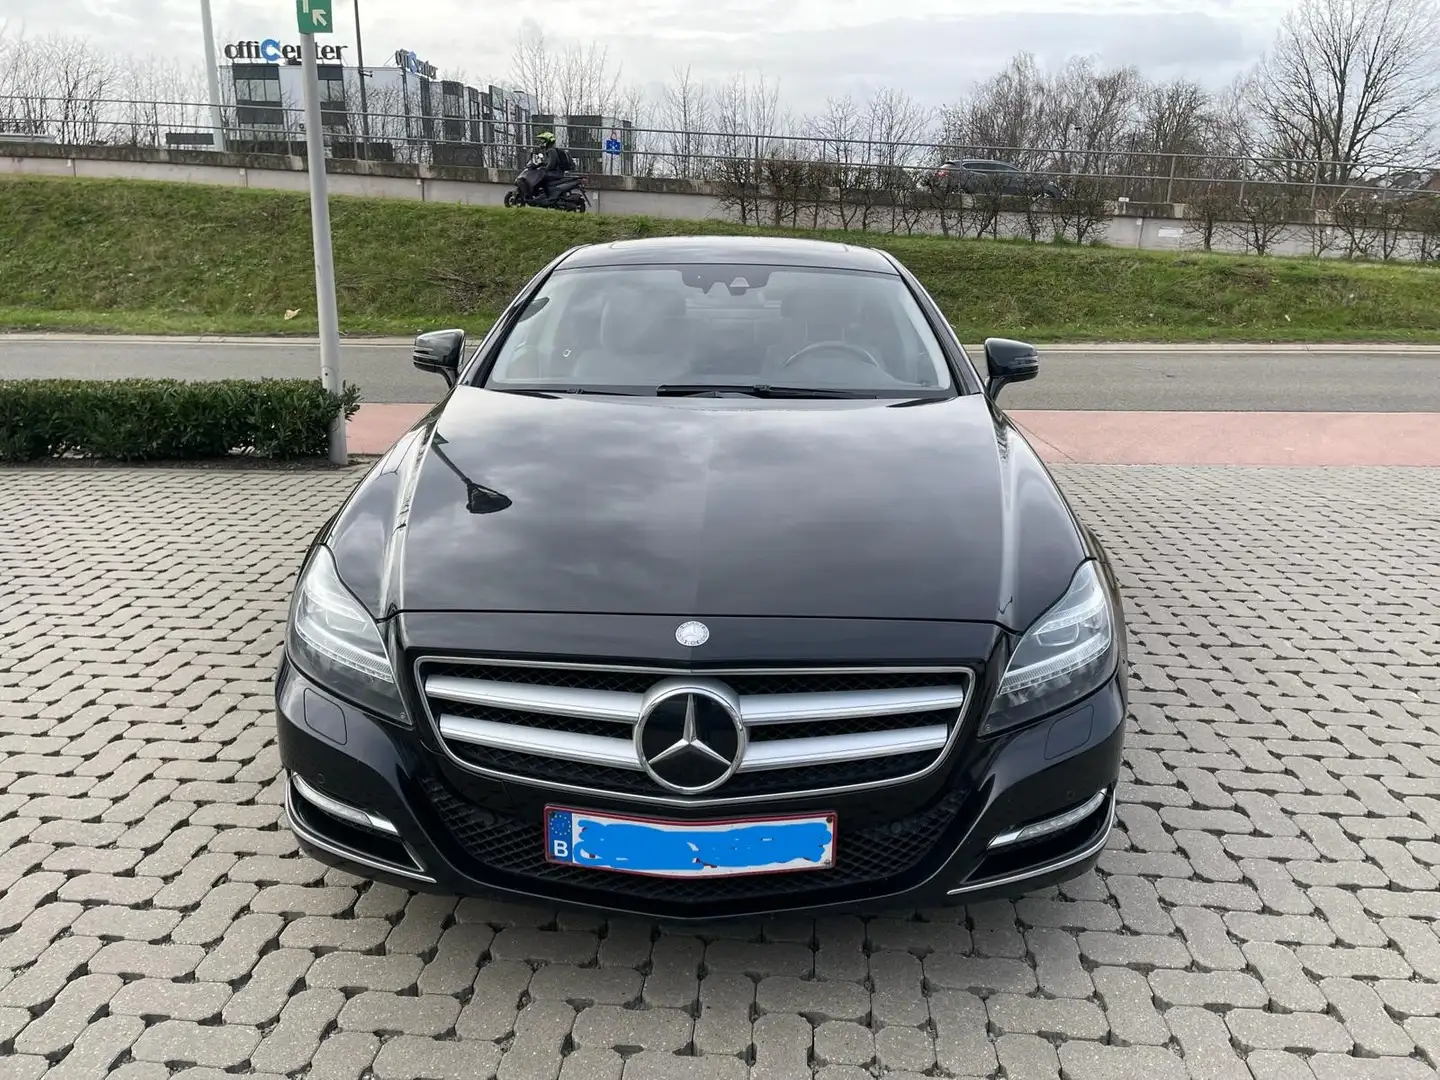 Mercedes-Benz CLS 250 CLS 250 CDI DPF BlueEFFICIENCY 7G-TRONIC Edition 1 Siyah - 2